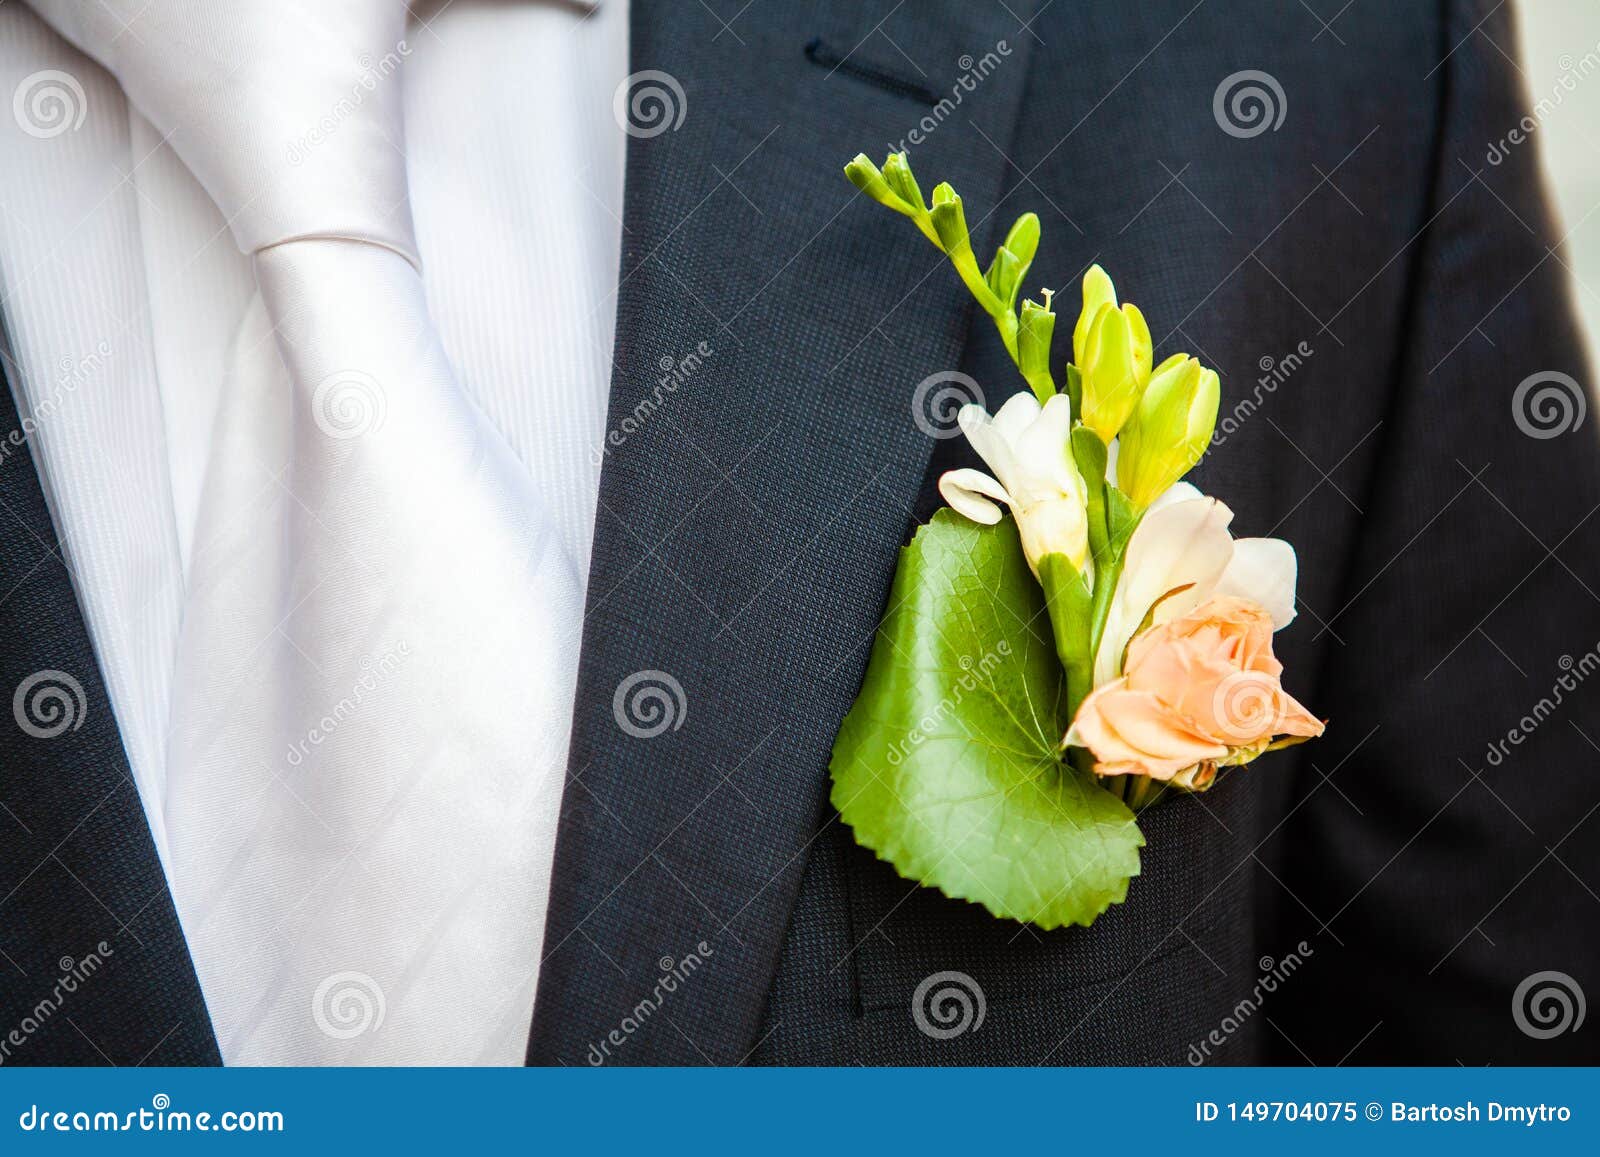 Boutonniere On The Lapel Of The Groom Stock Image Image Of Celebration Flower 149704075